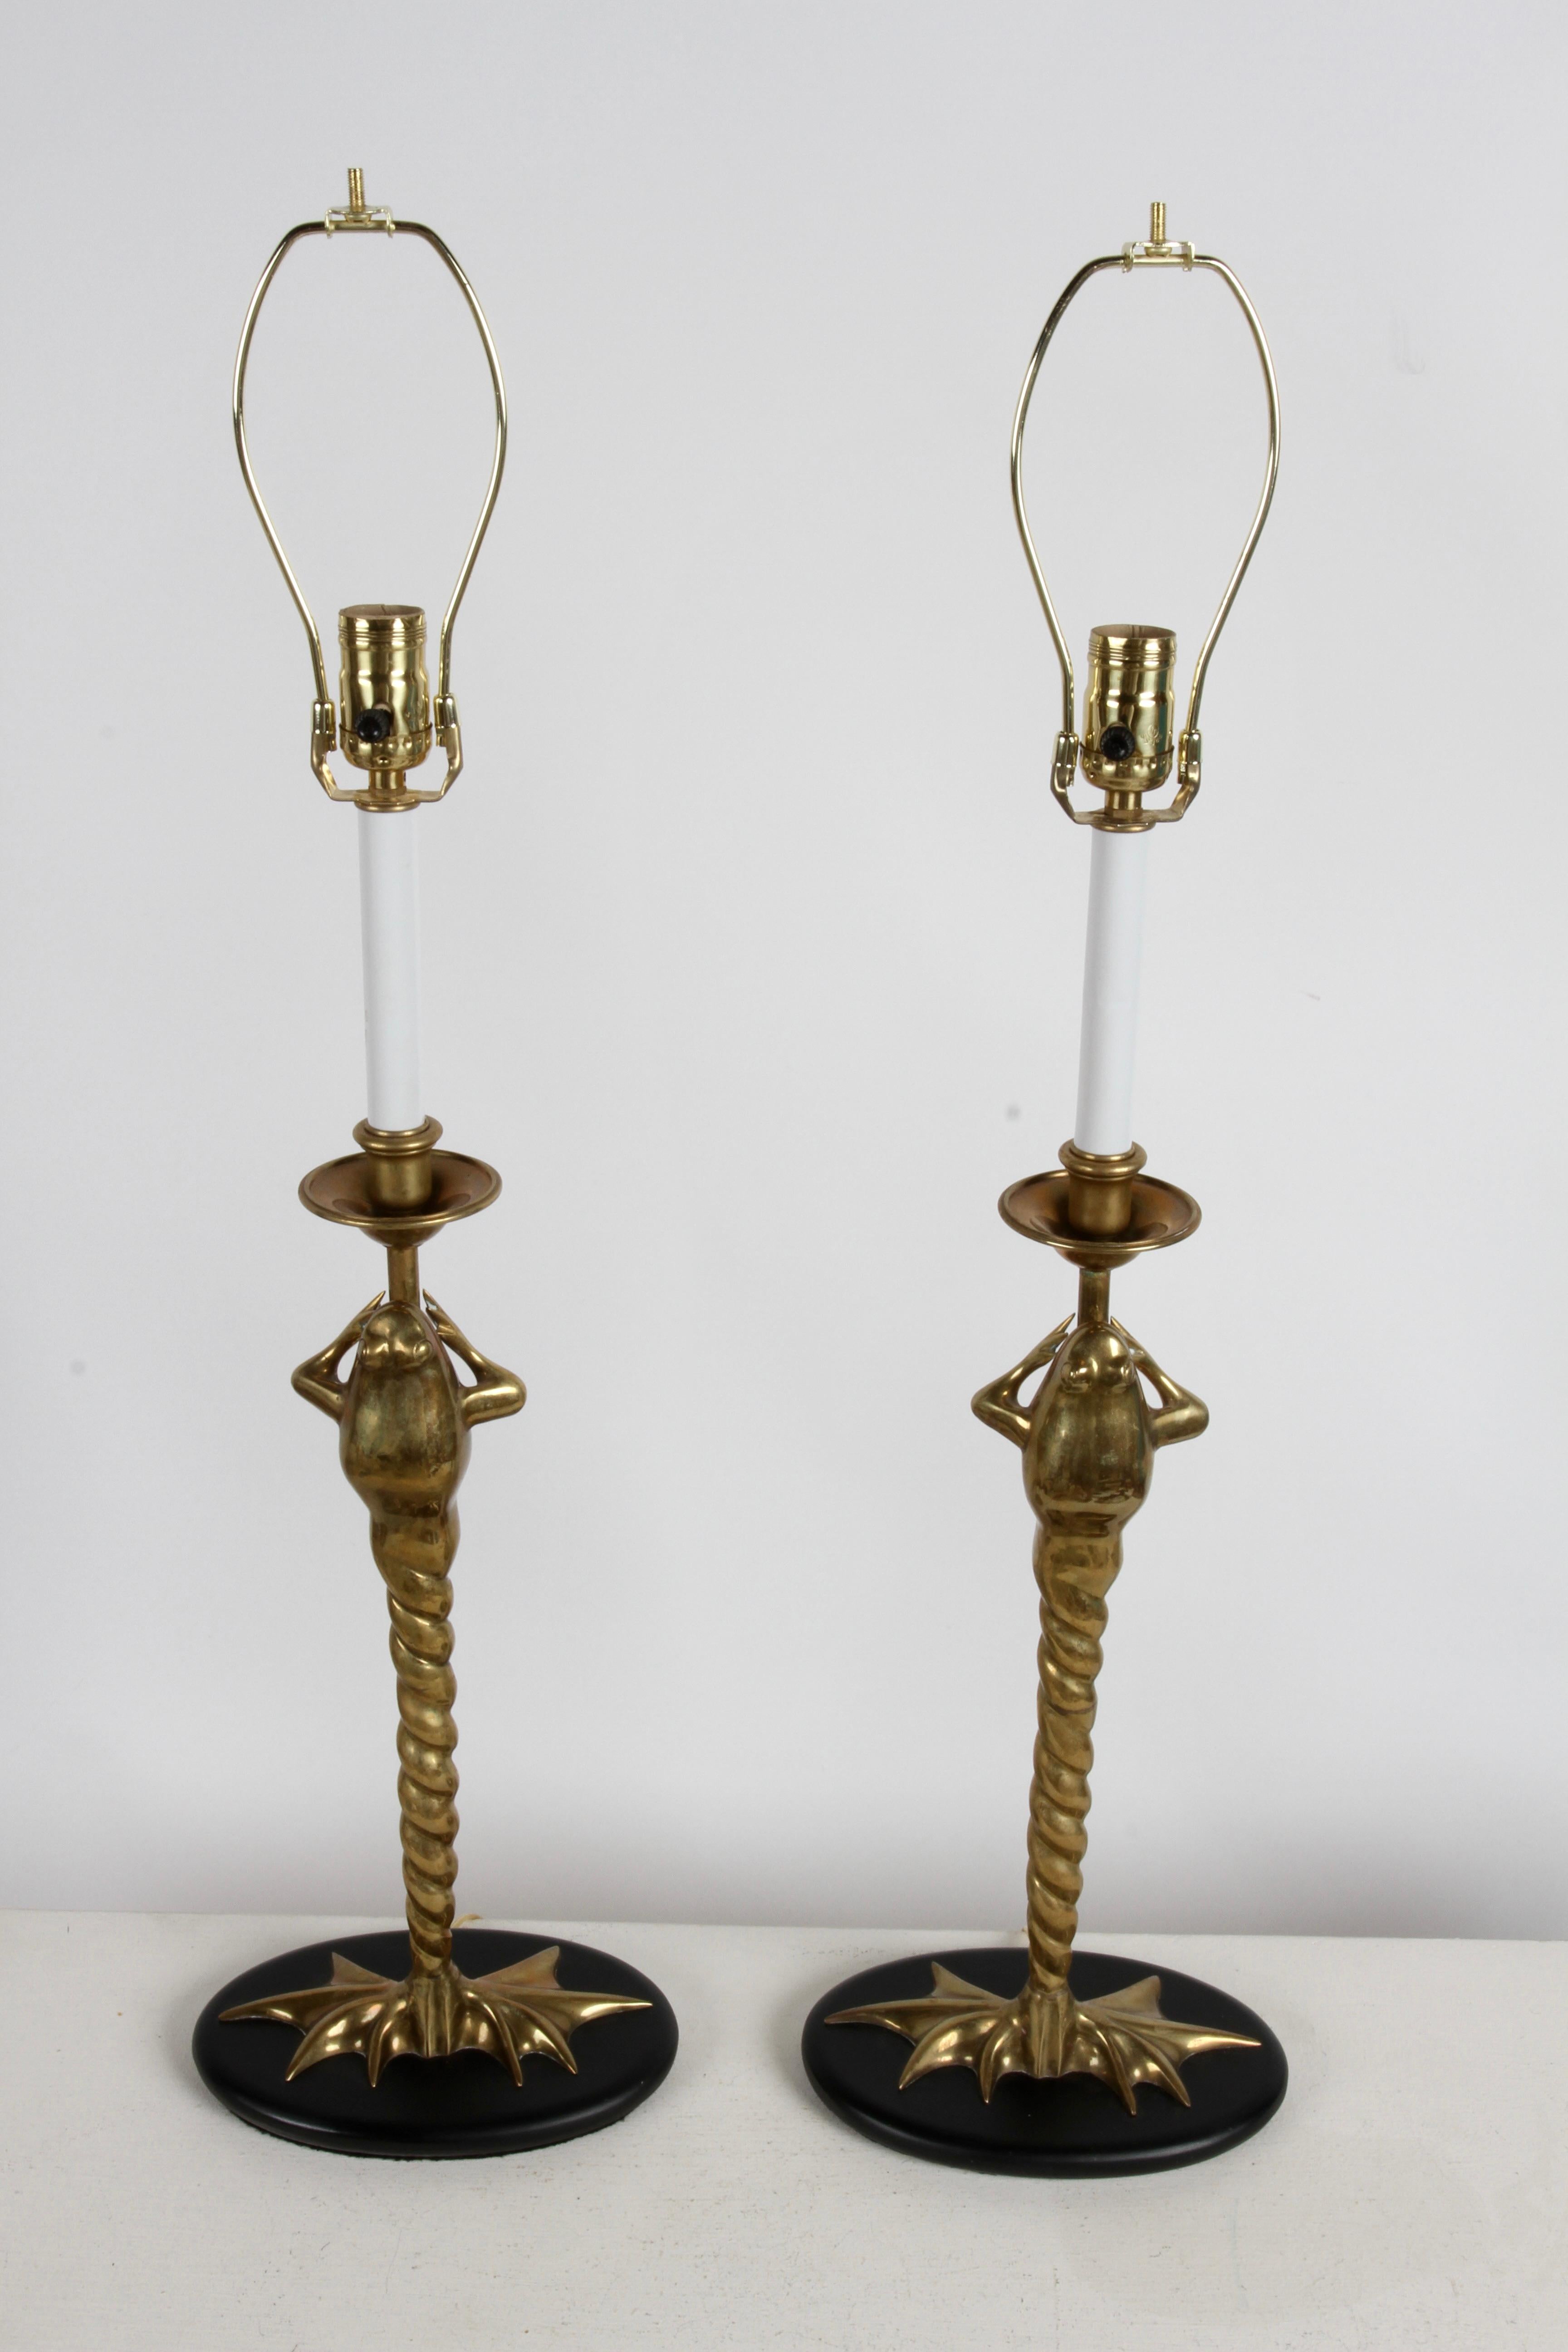 Hollywood Regency Pair of 1970s Solid Brass Frog with Twisted Legs Table Lamps by Chapman Lamp Co. For Sale